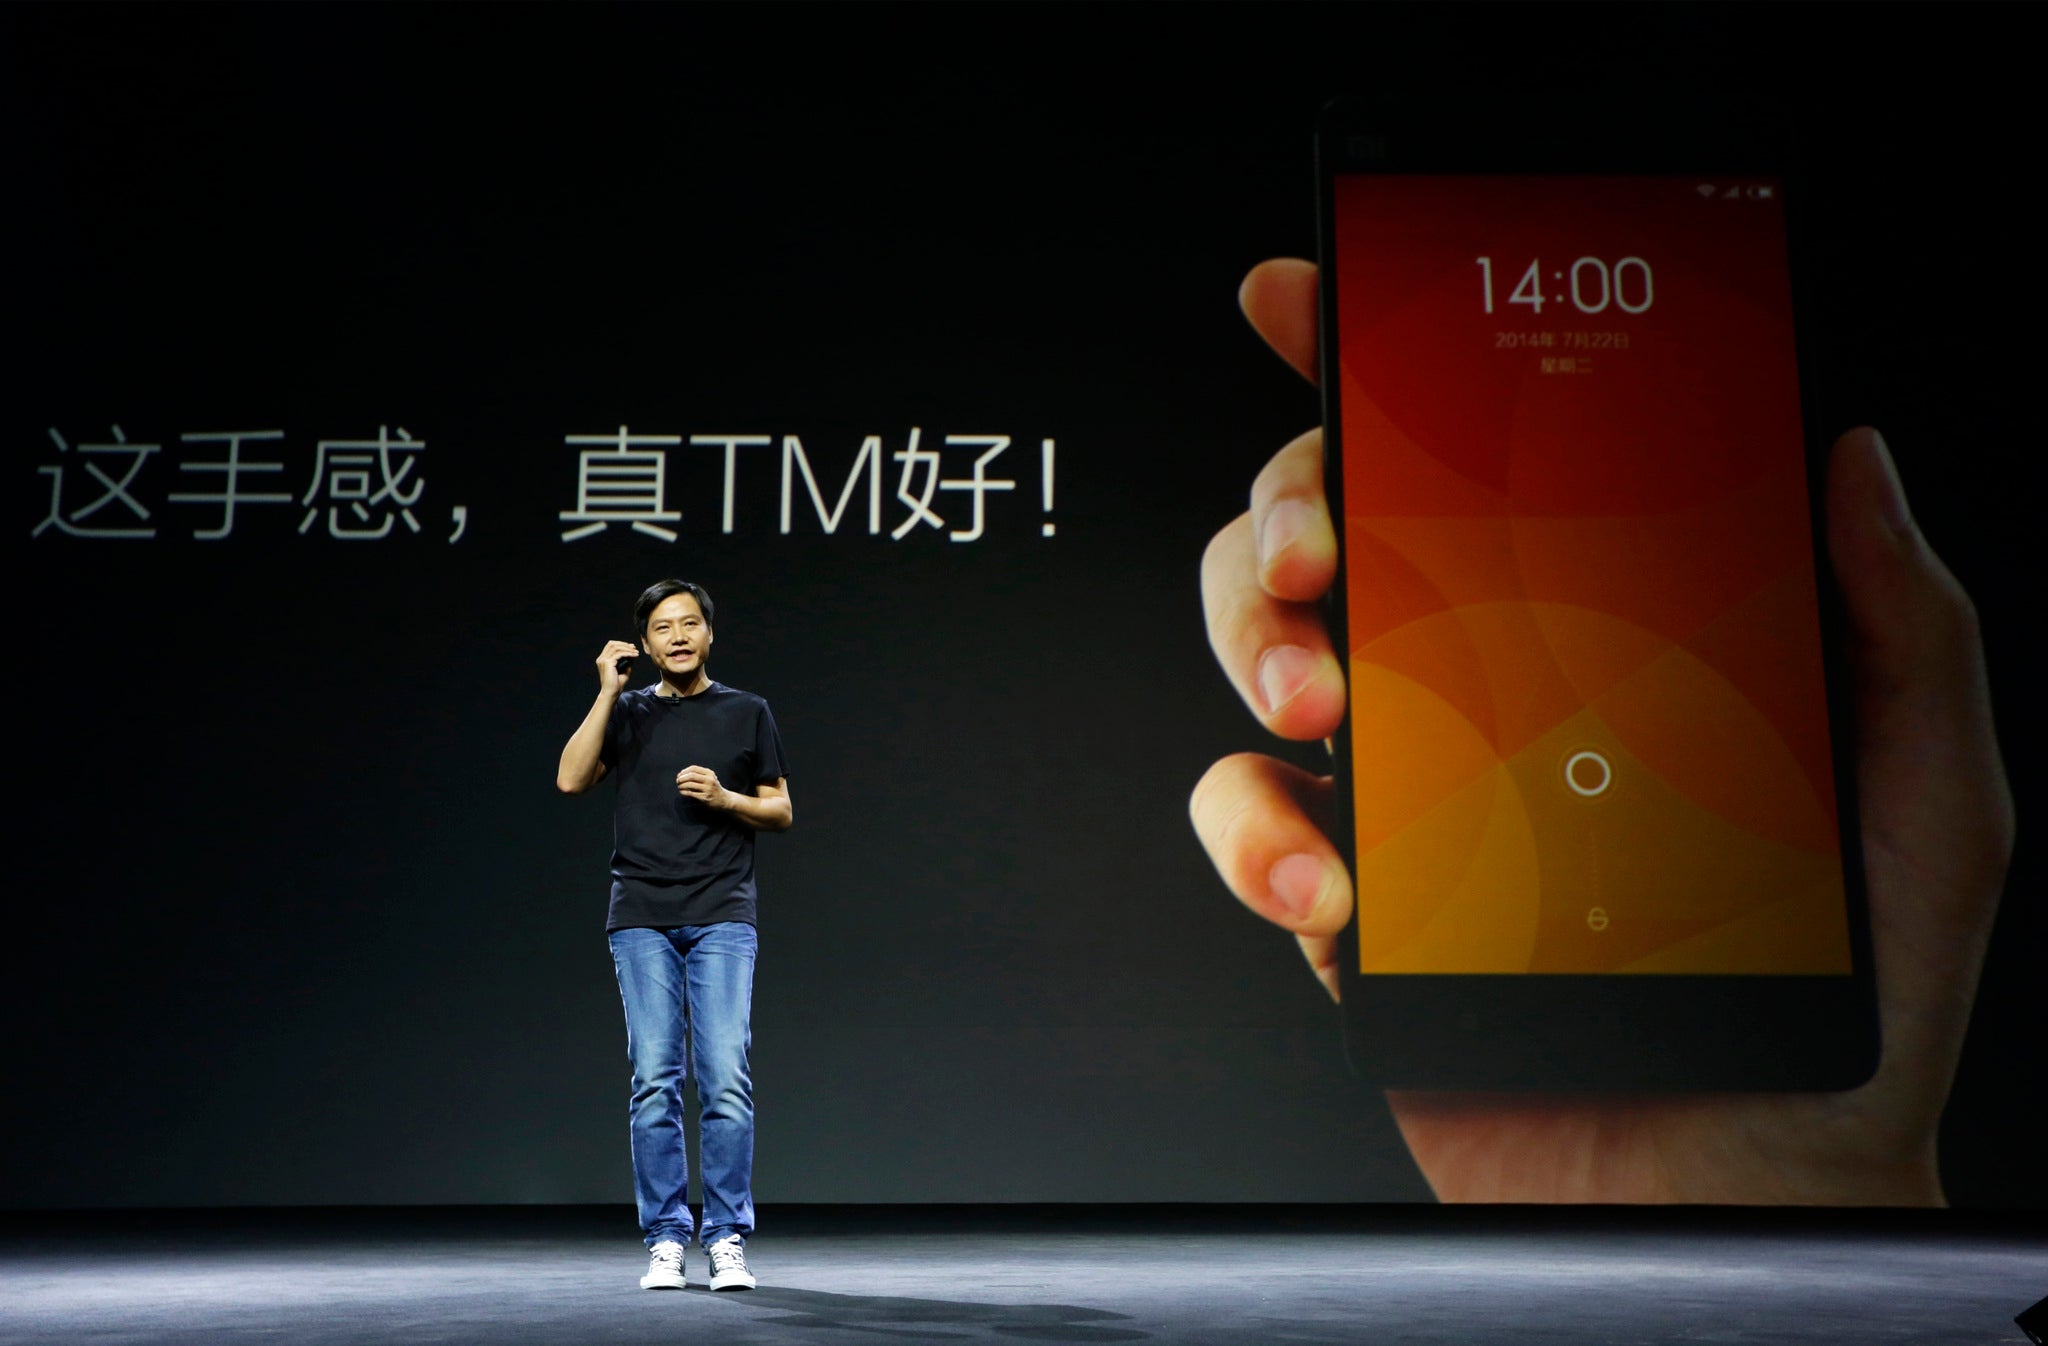 Xiaomi funder and CEO Lei Jun speaks at a launch ceremony of Xiaomi Phone 4, in Beijing, July 22, 2014.